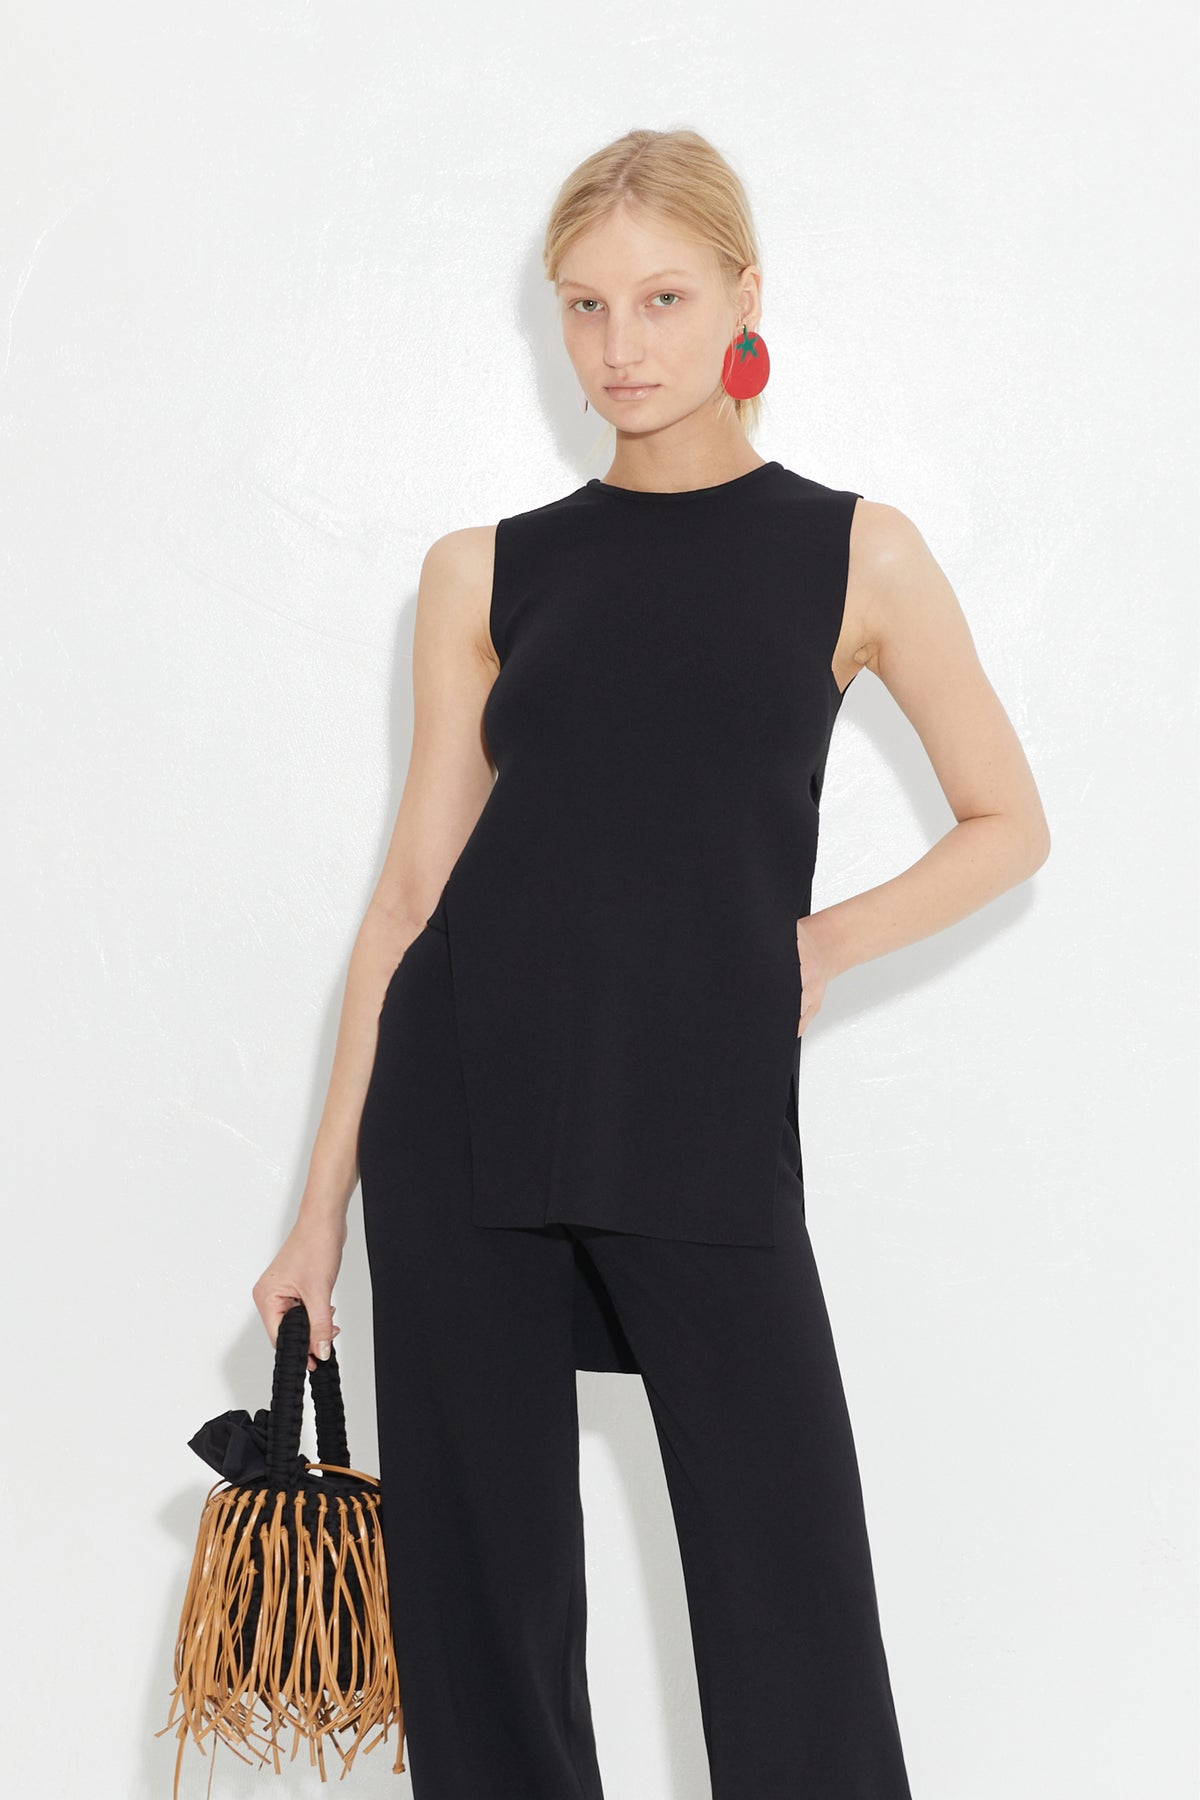 Knits By Canoga Top in Black